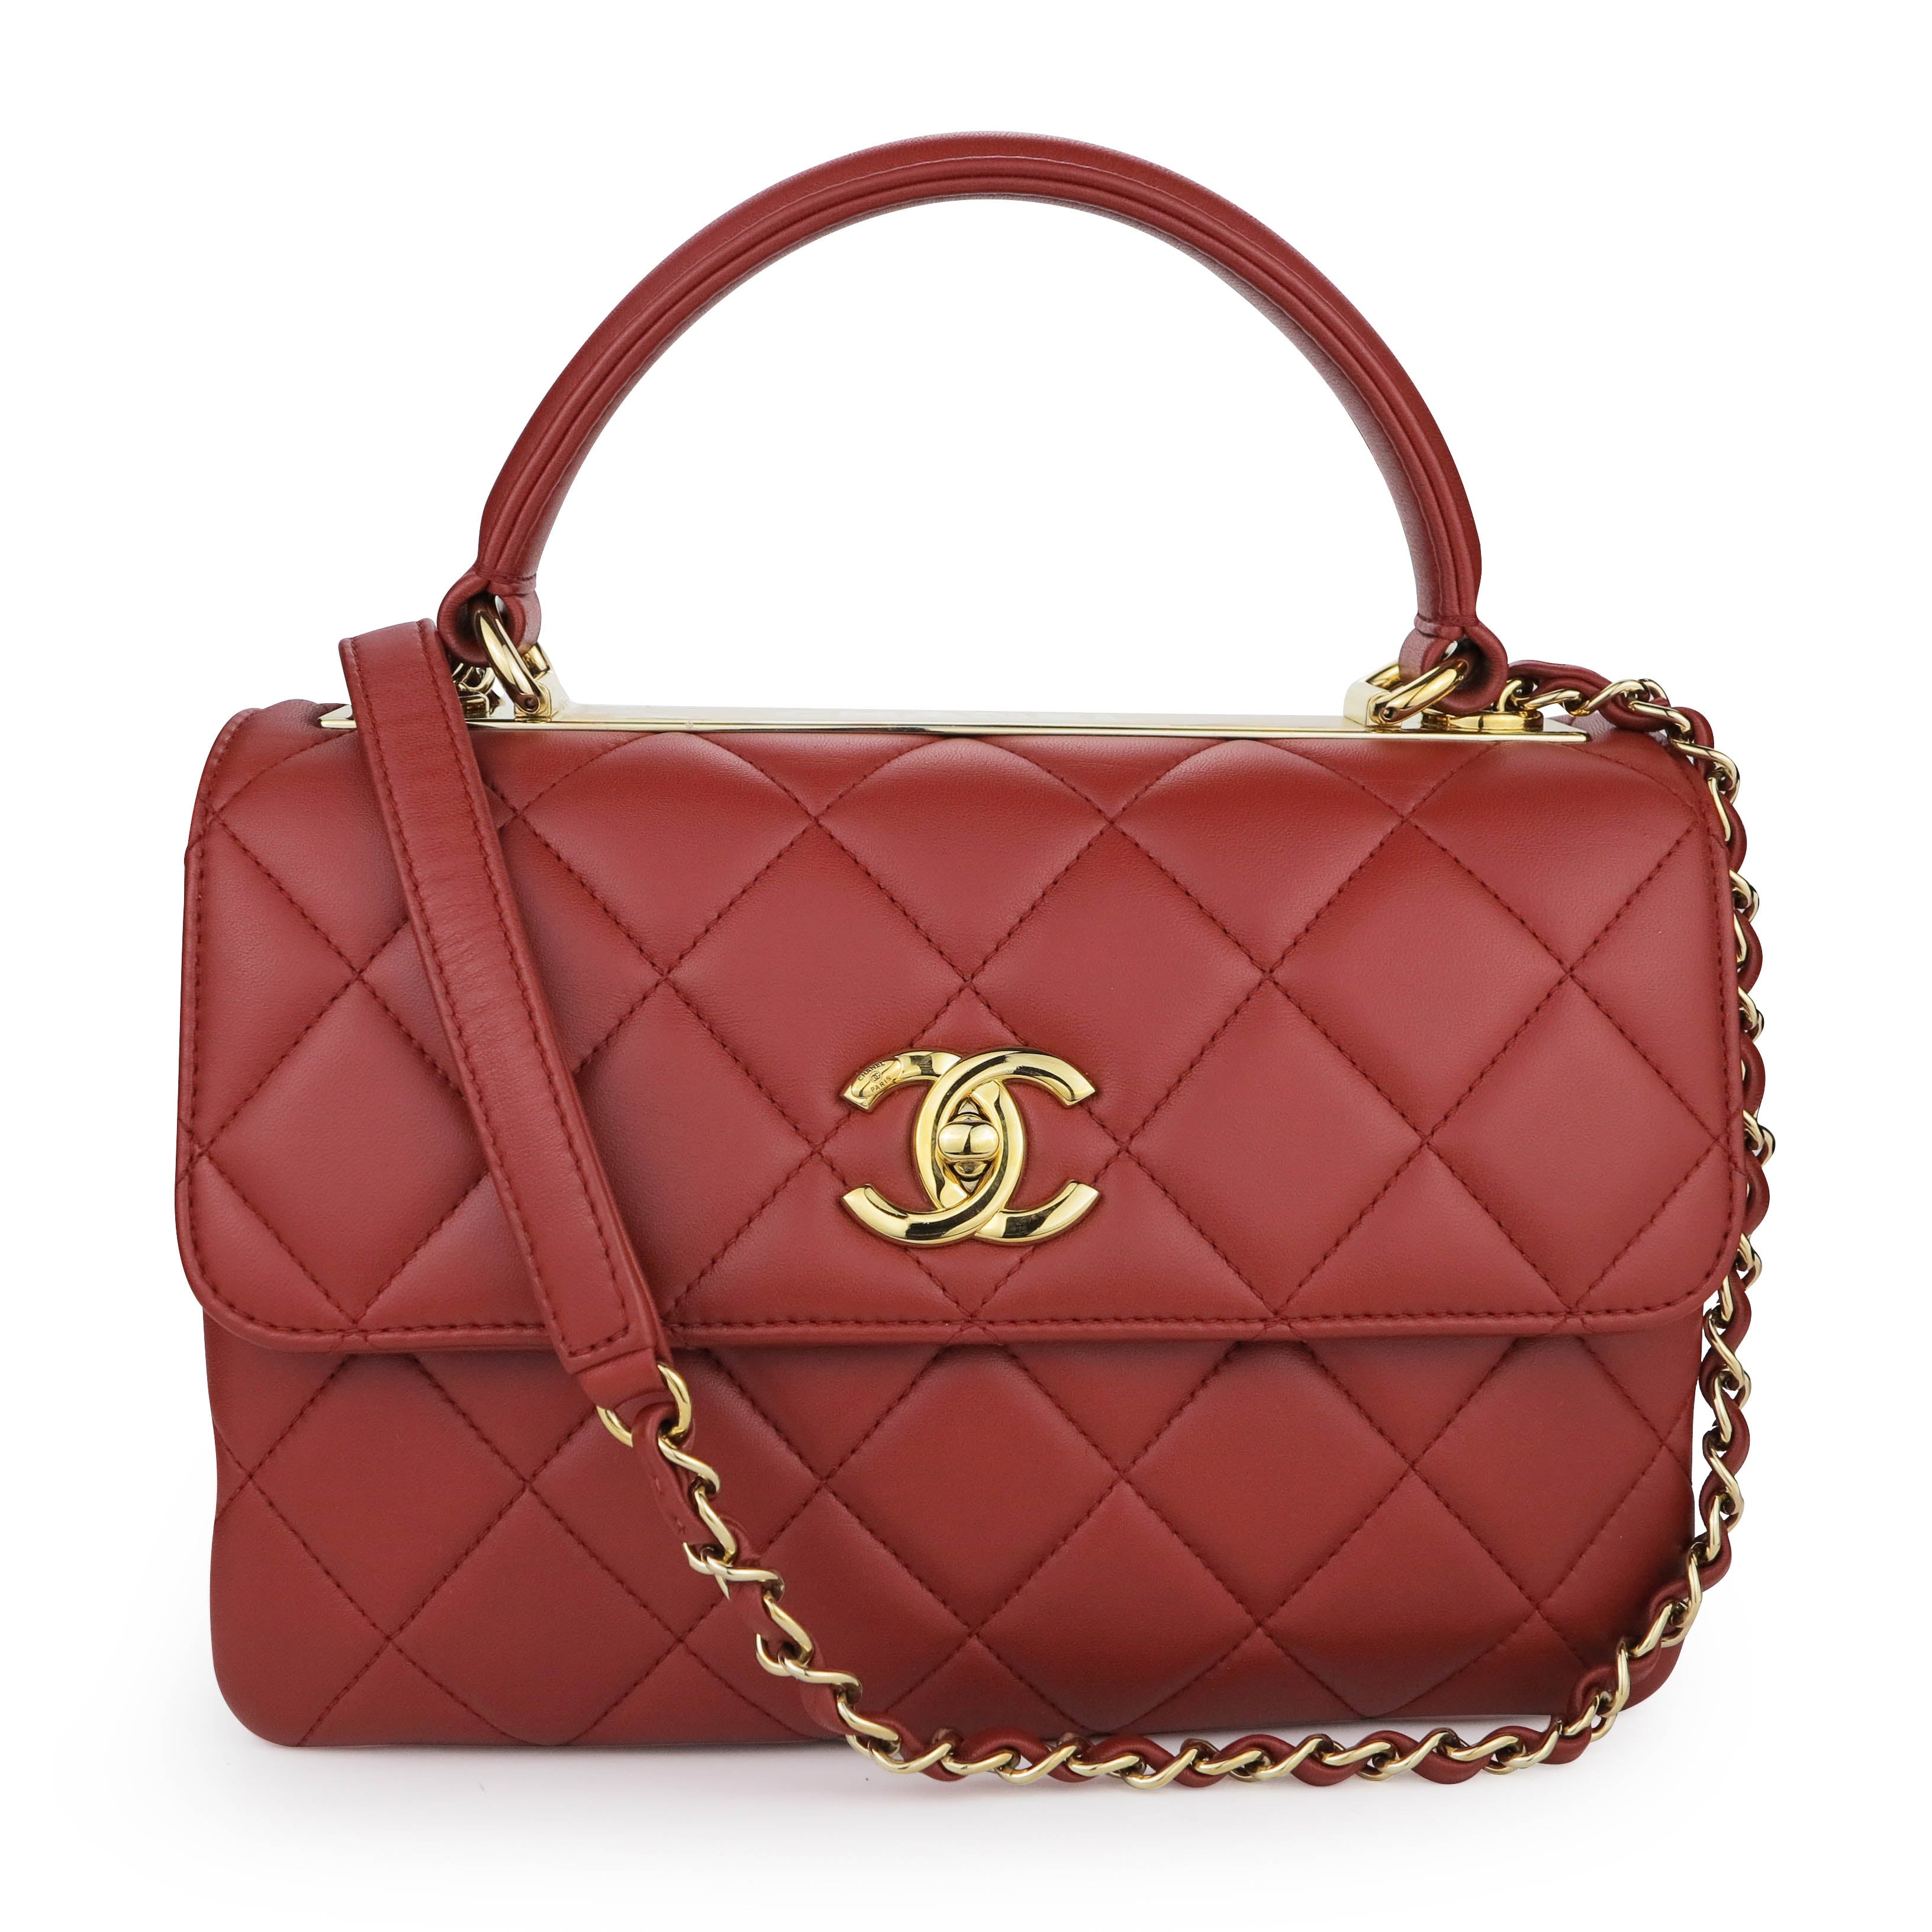 CHANEL Small Trendy CC Flap Bag with Top Handle in Red